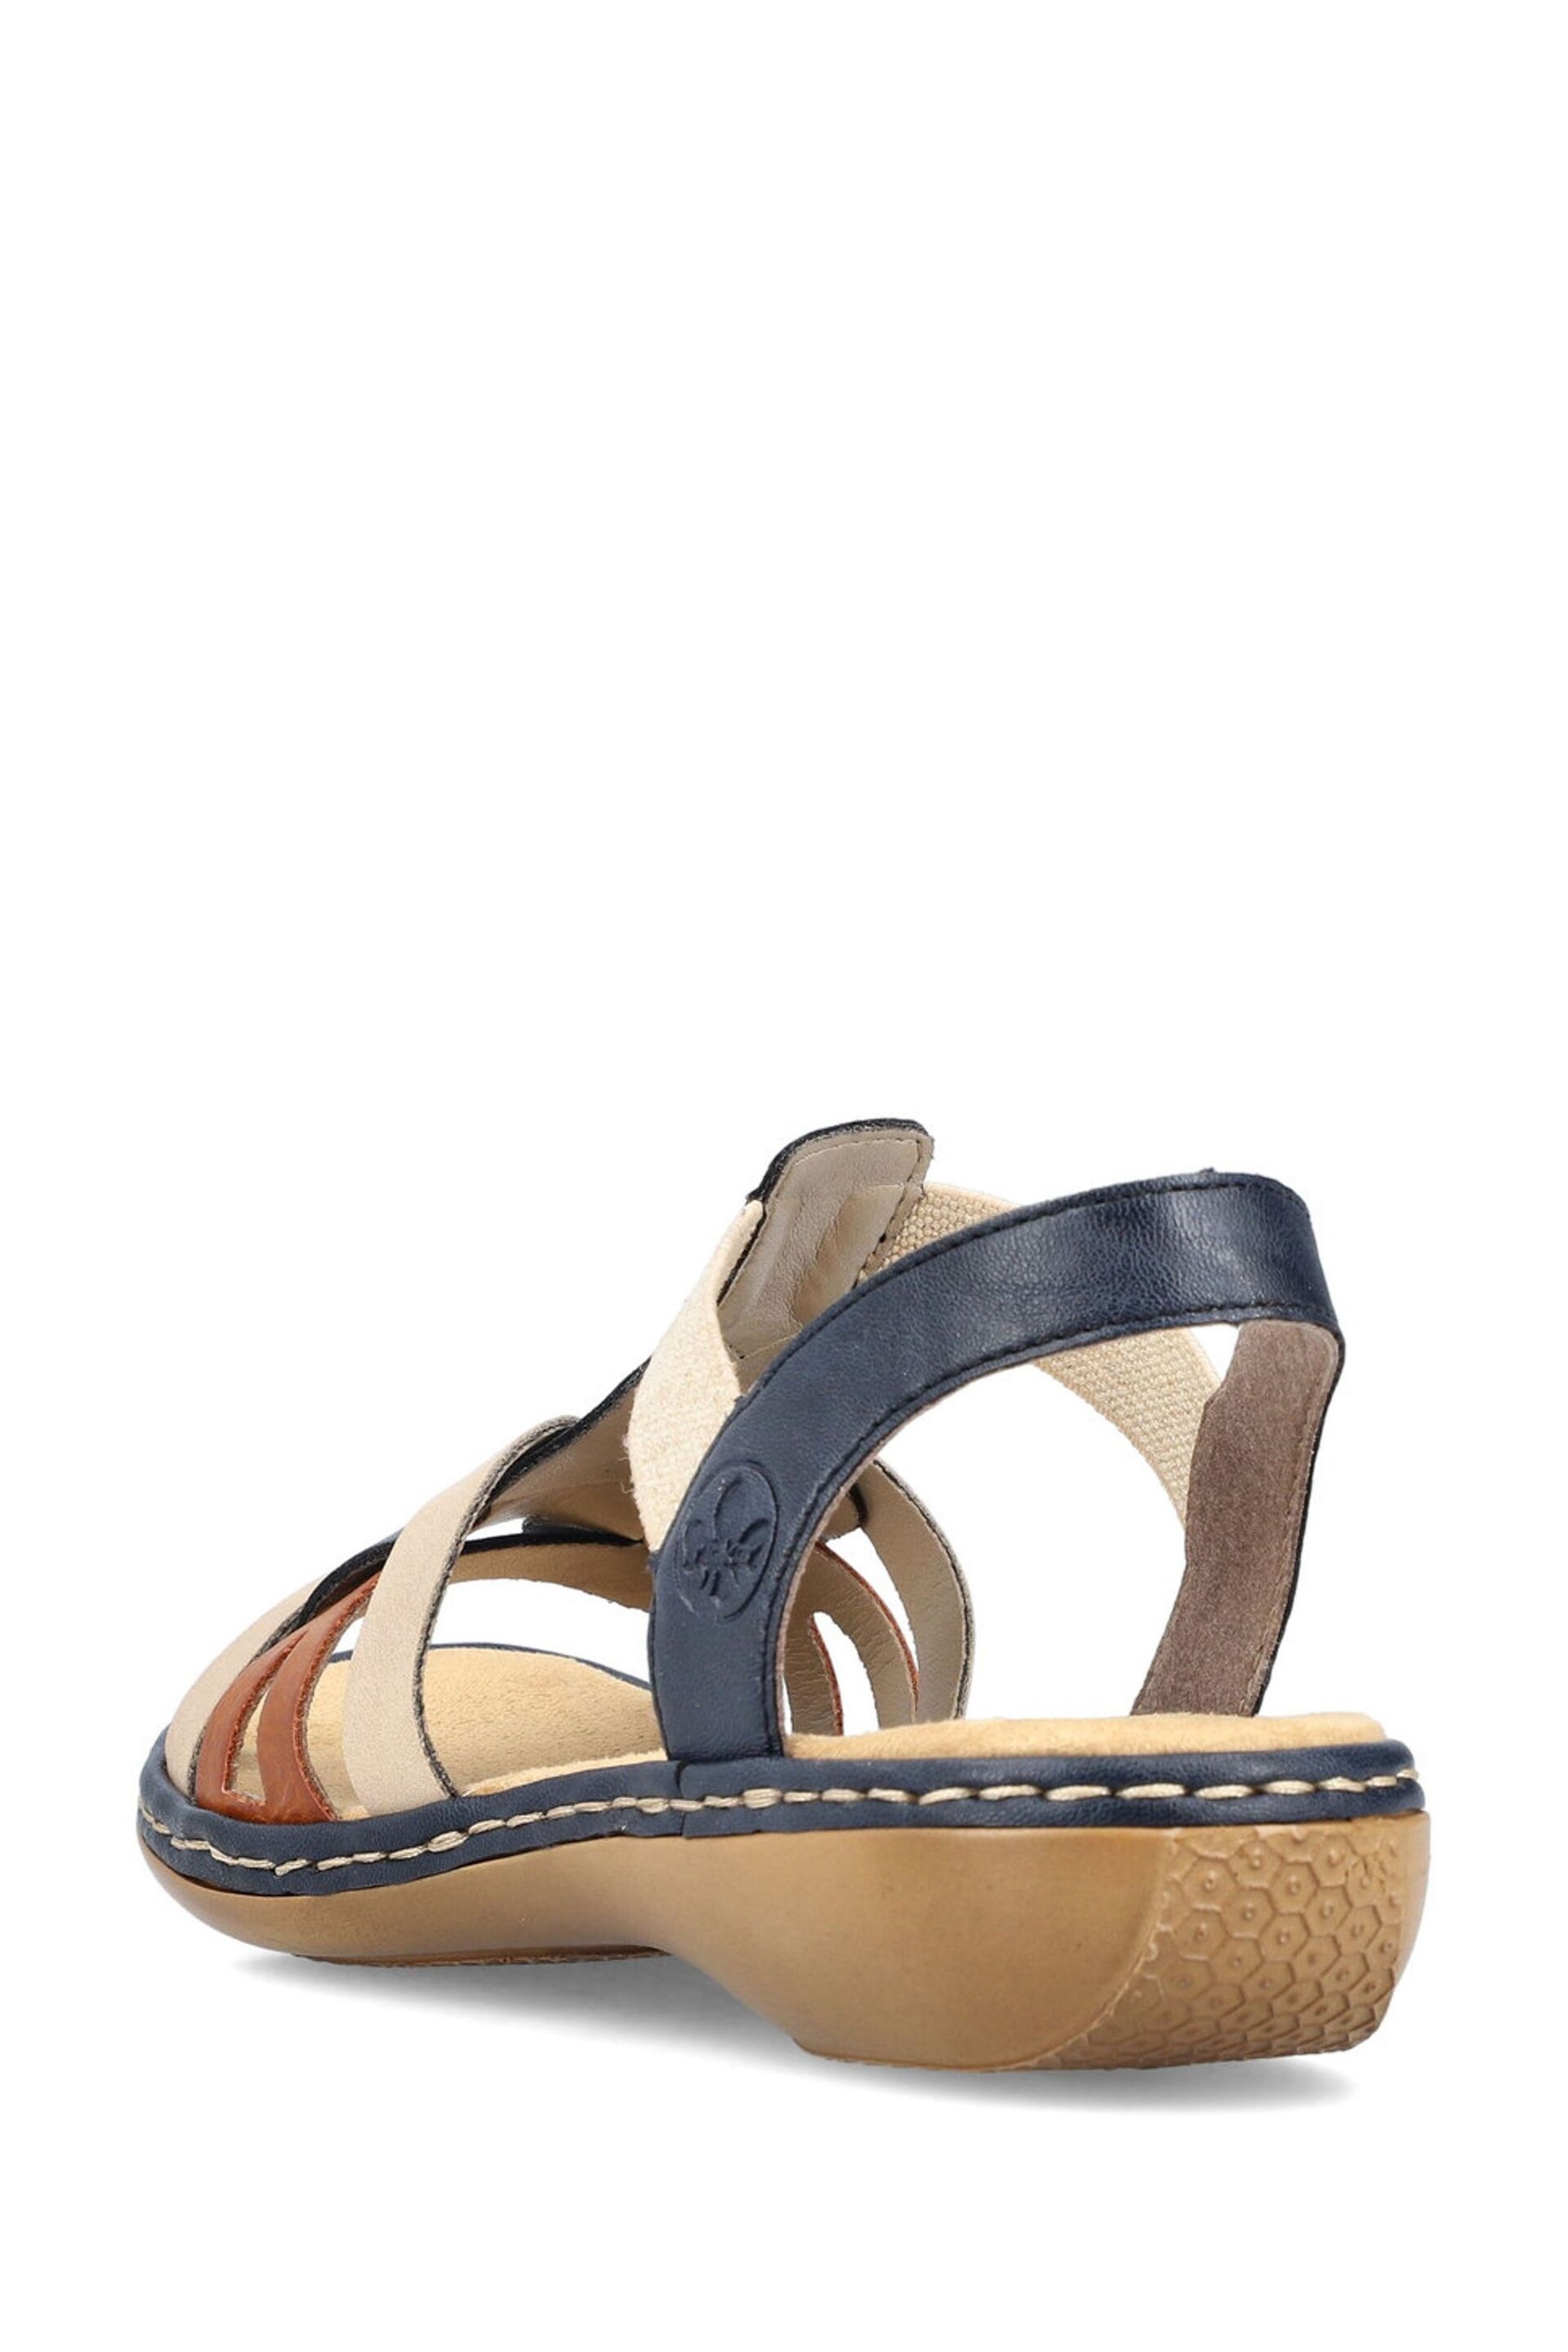 Rieker Womens Elastic Stretch Sandals - Image 3 of 10